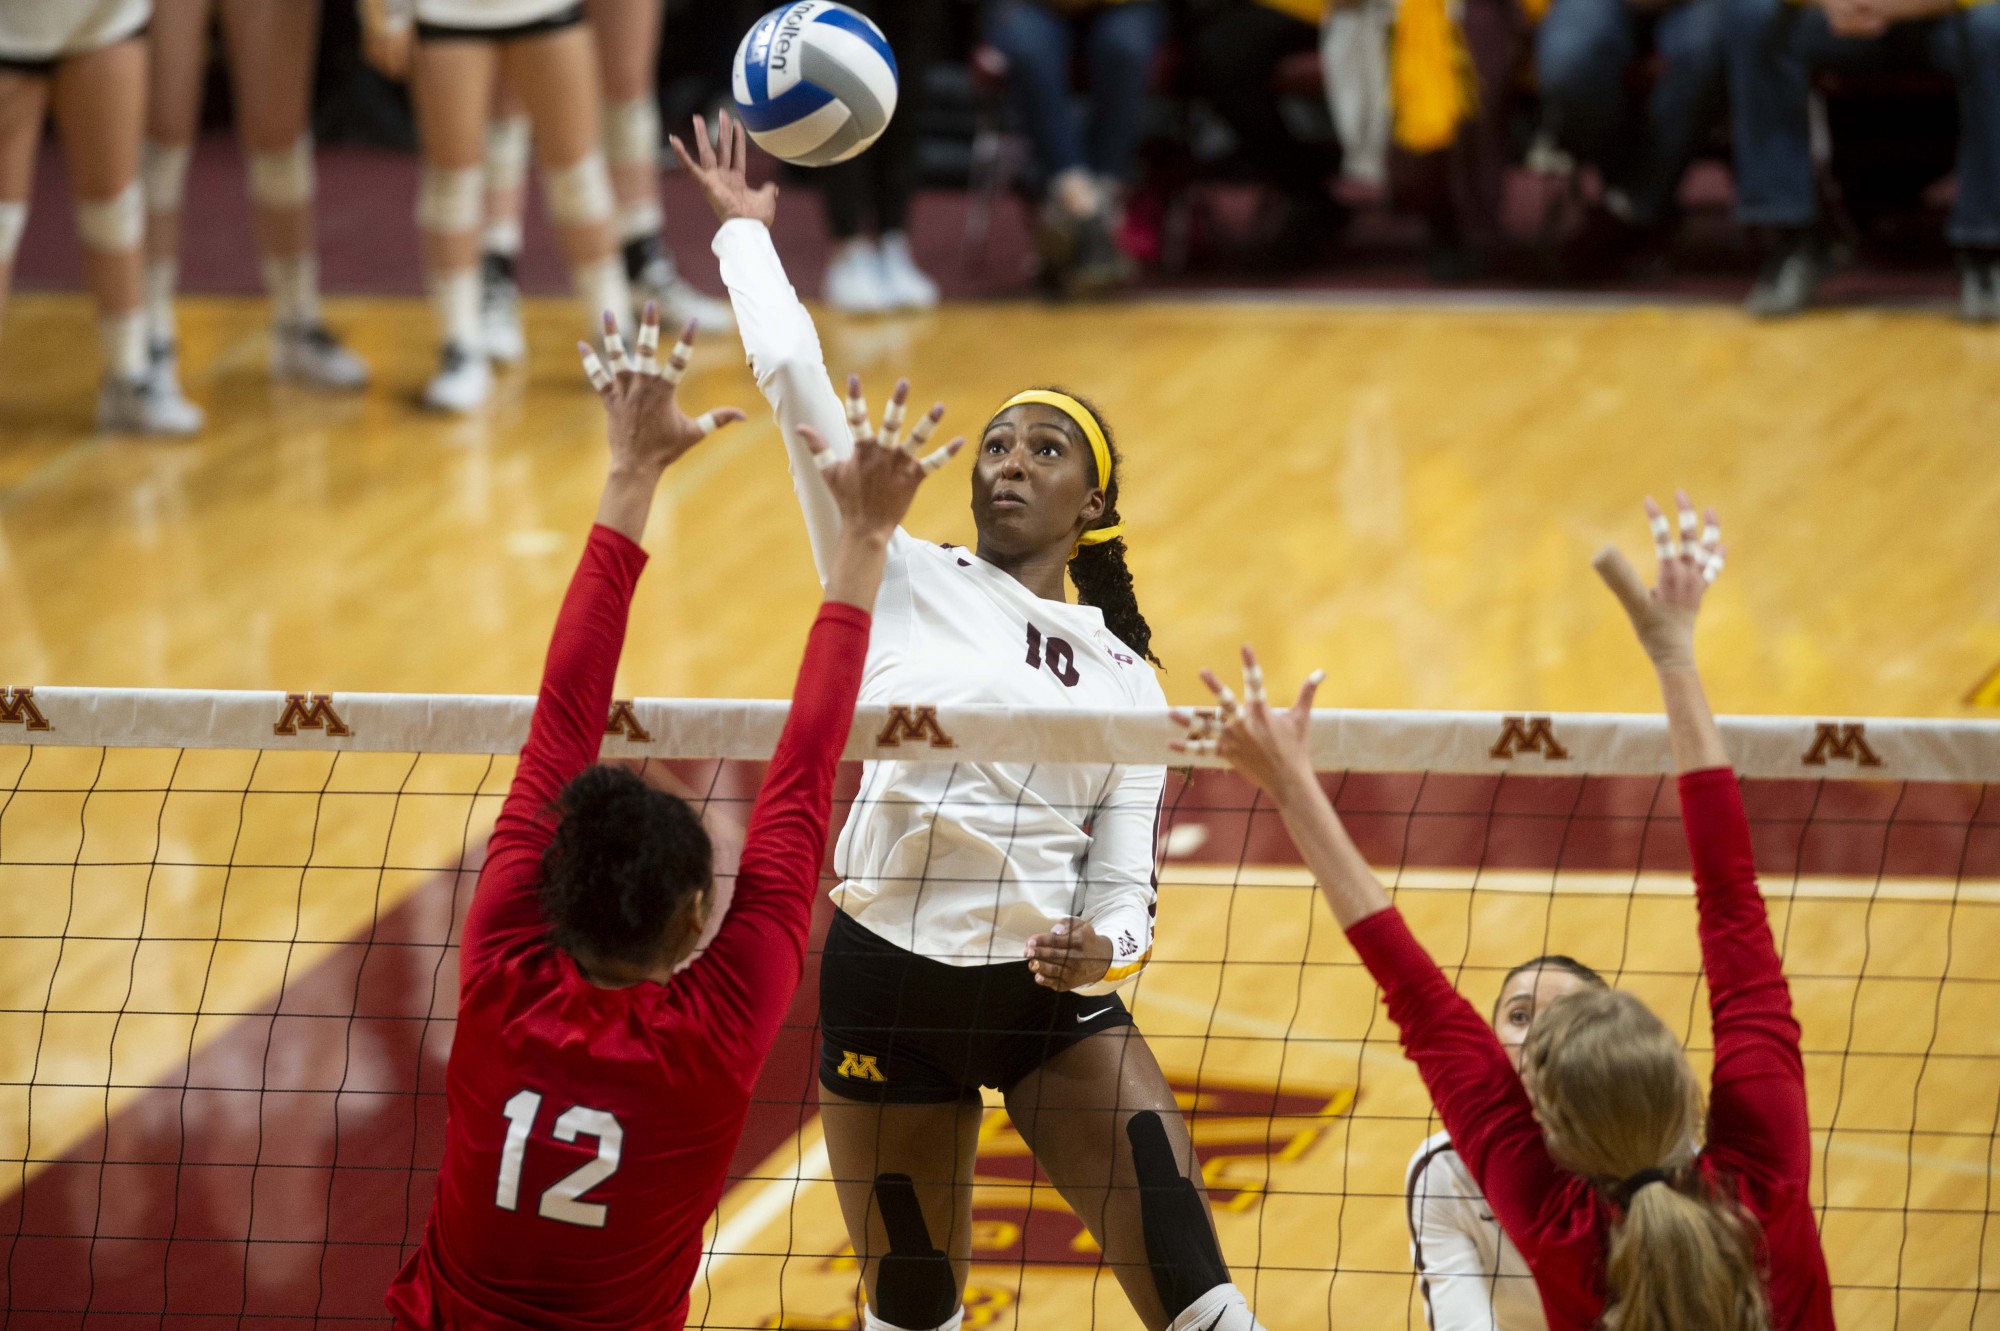 Opposite Hitter Stephanie Samedy jumps to spike the ball at the Maturi Pavilion on Friday, Nov. 22. The Gophers took Nebraska to five sets but ultimately fell 3-2. 